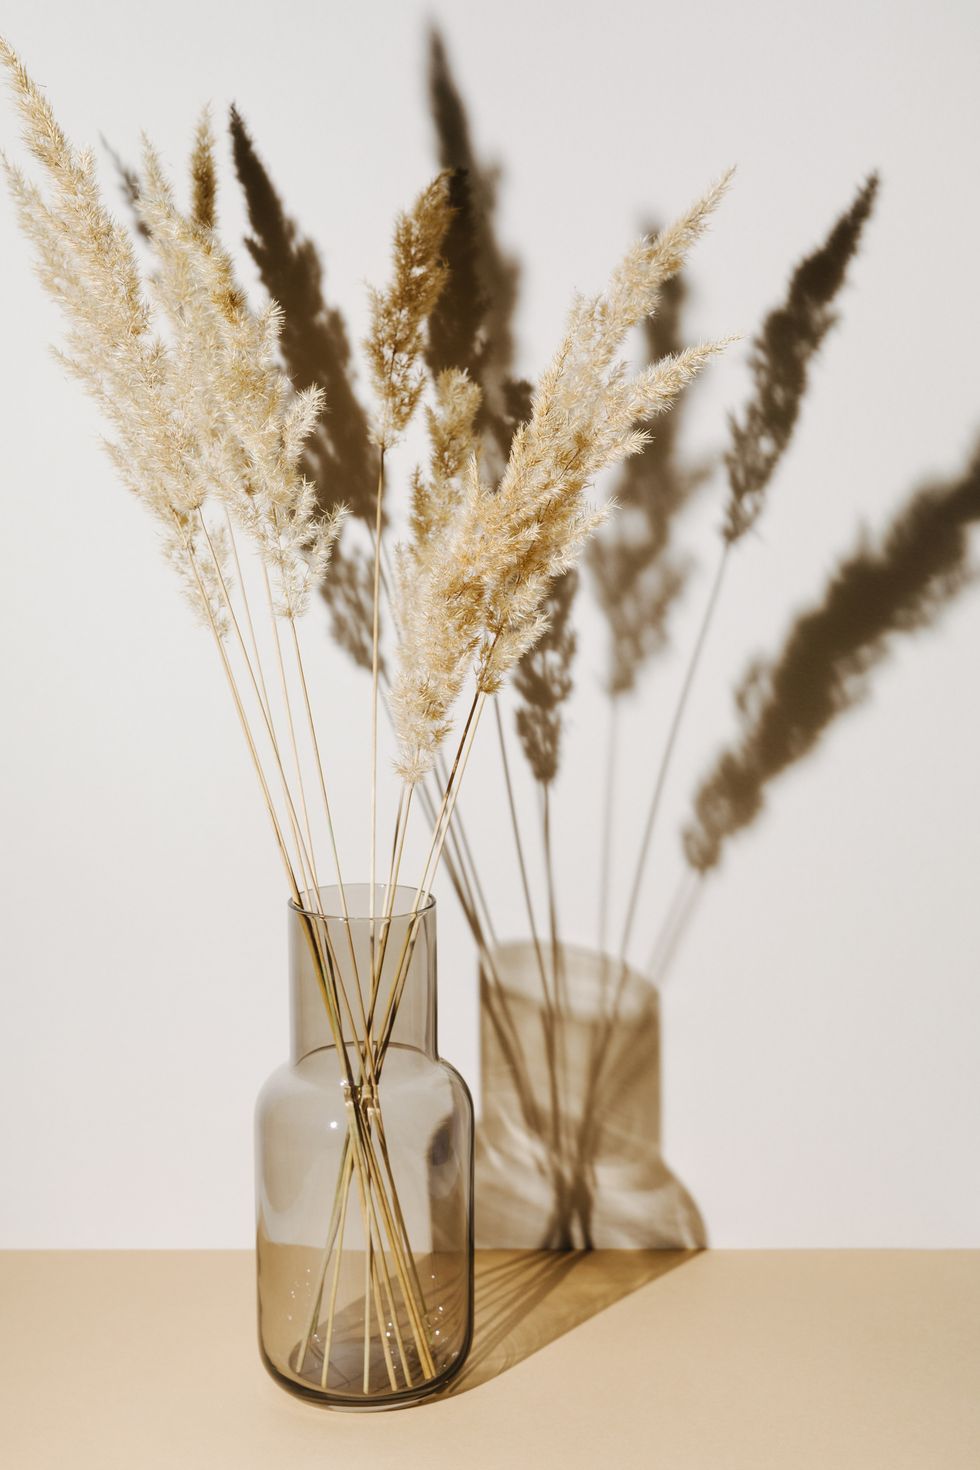 pampas grass branches in vase on pastel neutral beige background with sun light and trendy shadow reeds foliage modern interior design concept